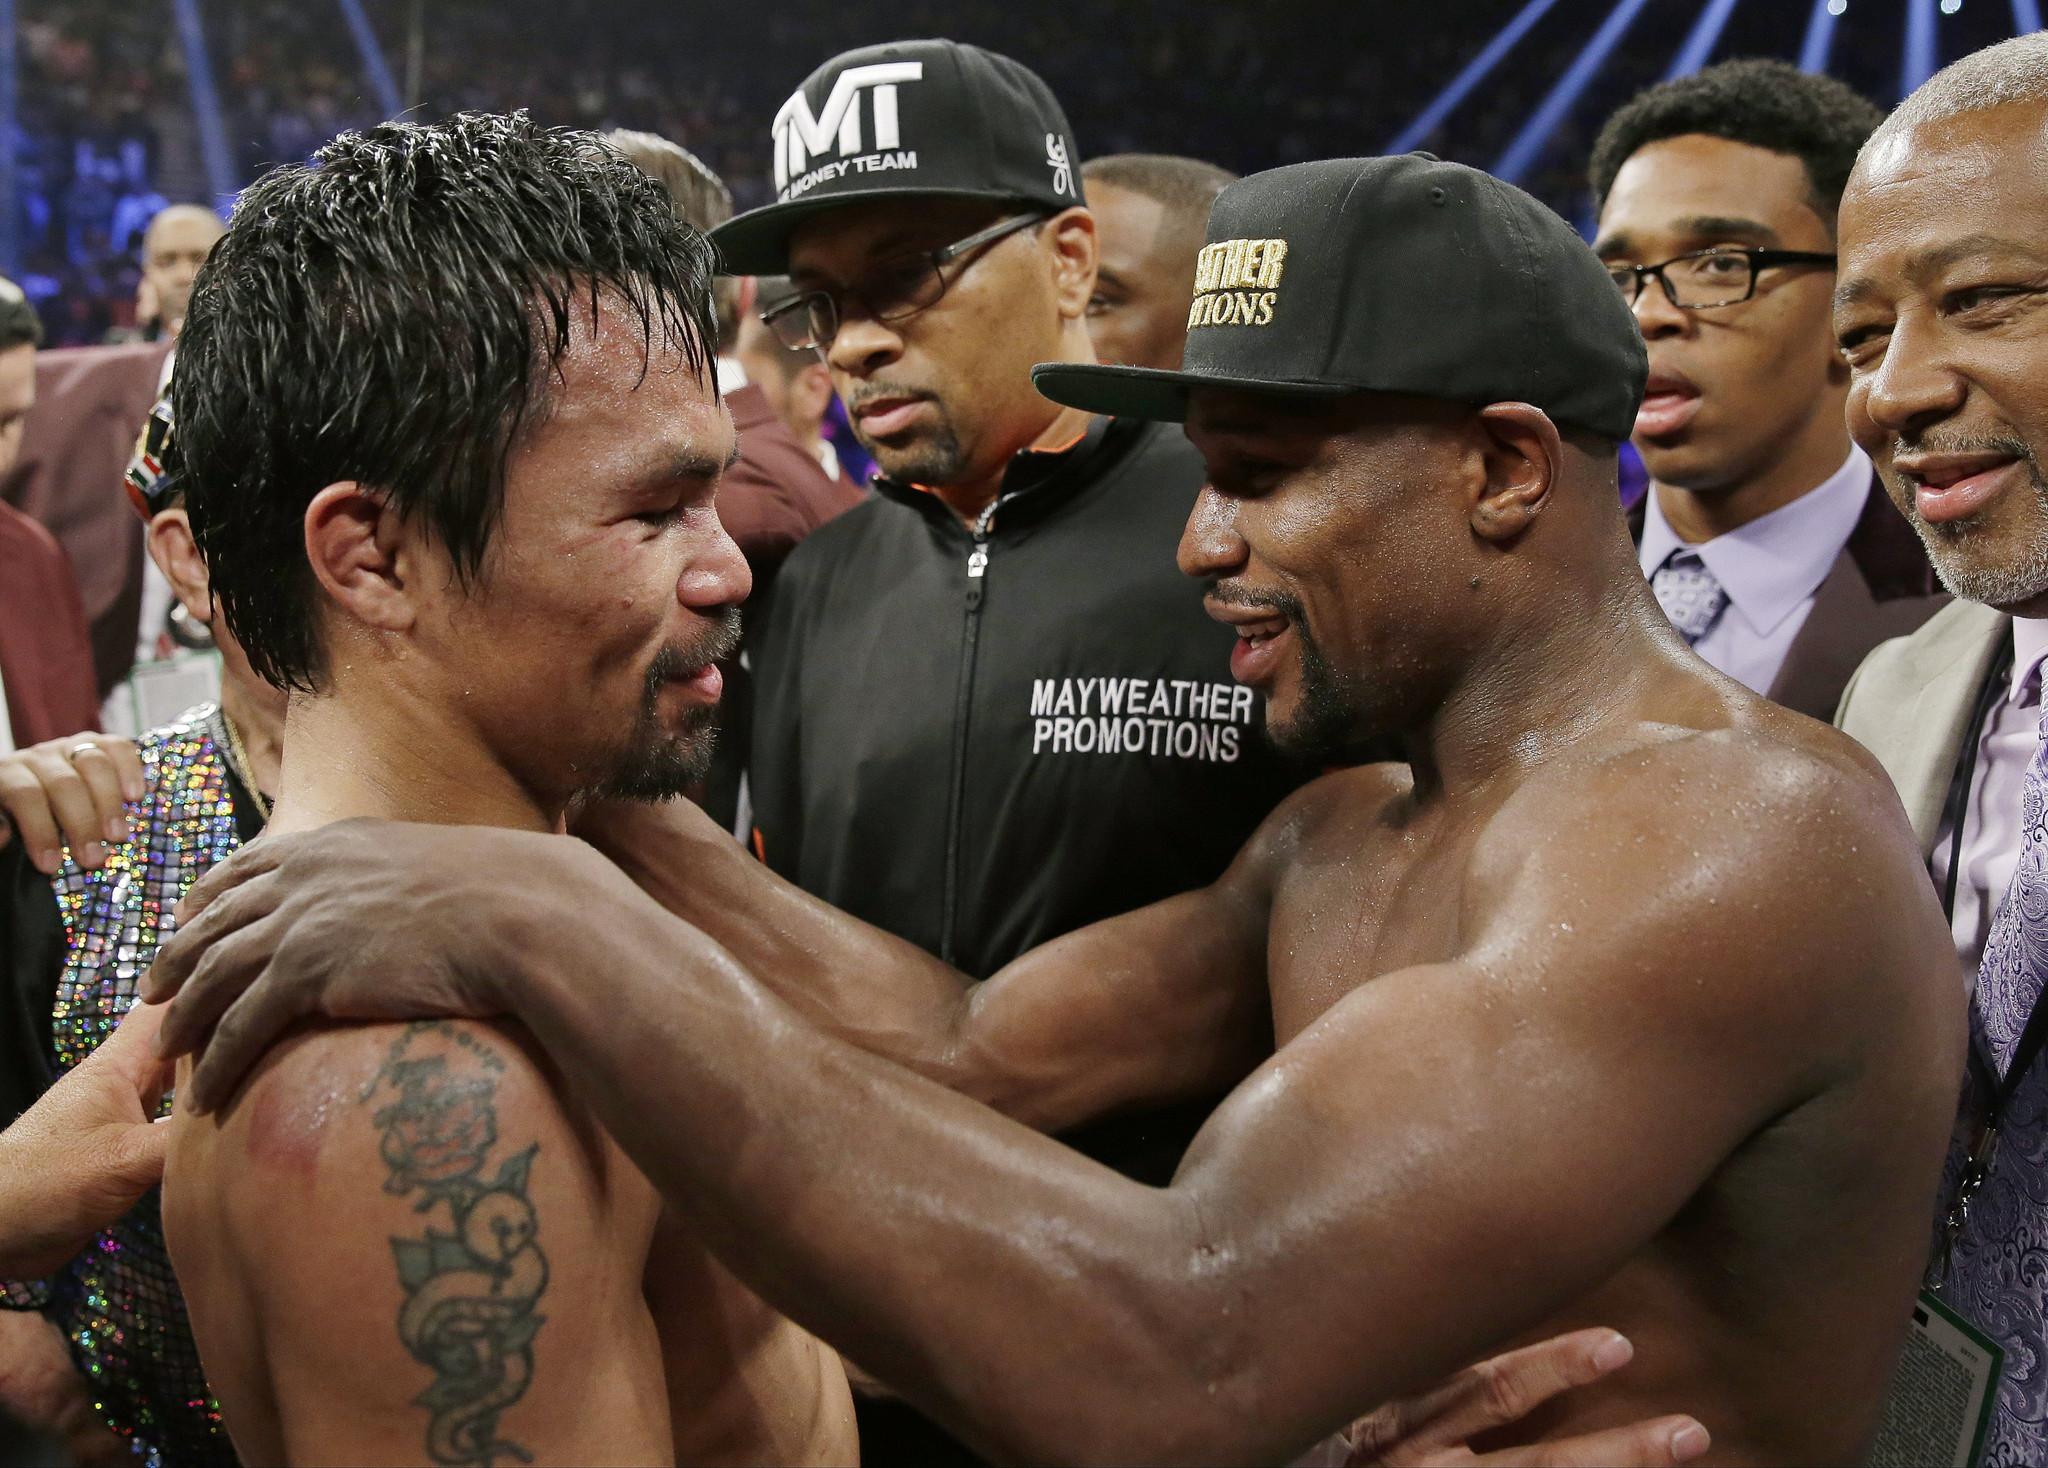 Manny Pacquiao vs Floyd Mayweather Jr rematch is on the cards